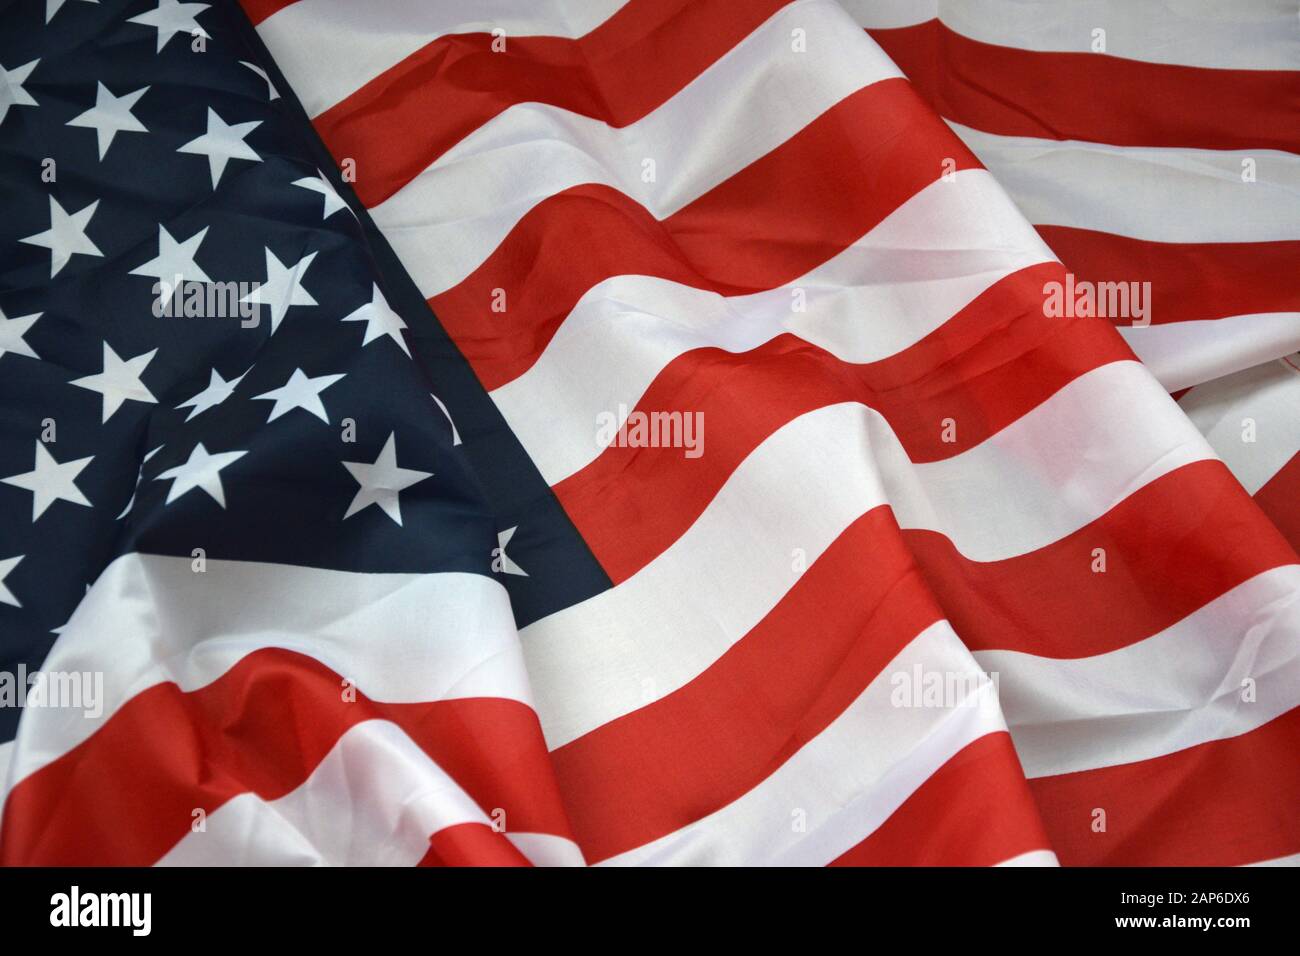 Closeup of American flag on plain background. Colorful waving horizontal US  banner with stars and stripes Stock Photo - Alamy